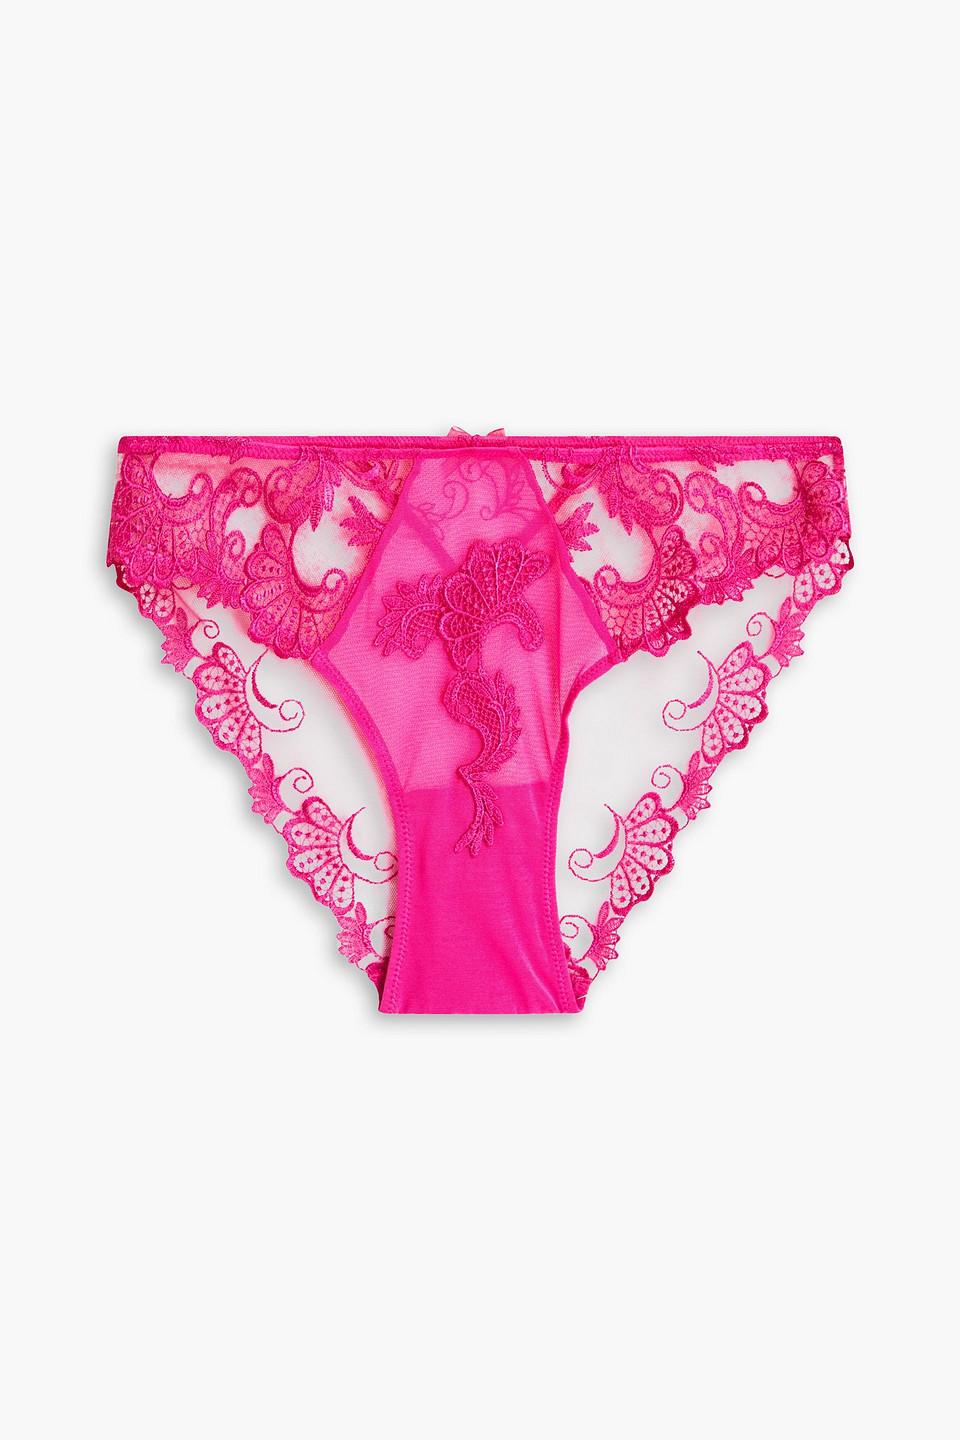 Lise Charmel Dressing Floral Embroidered Tulle Low-rise Briefs in Pink |  Lyst Canada